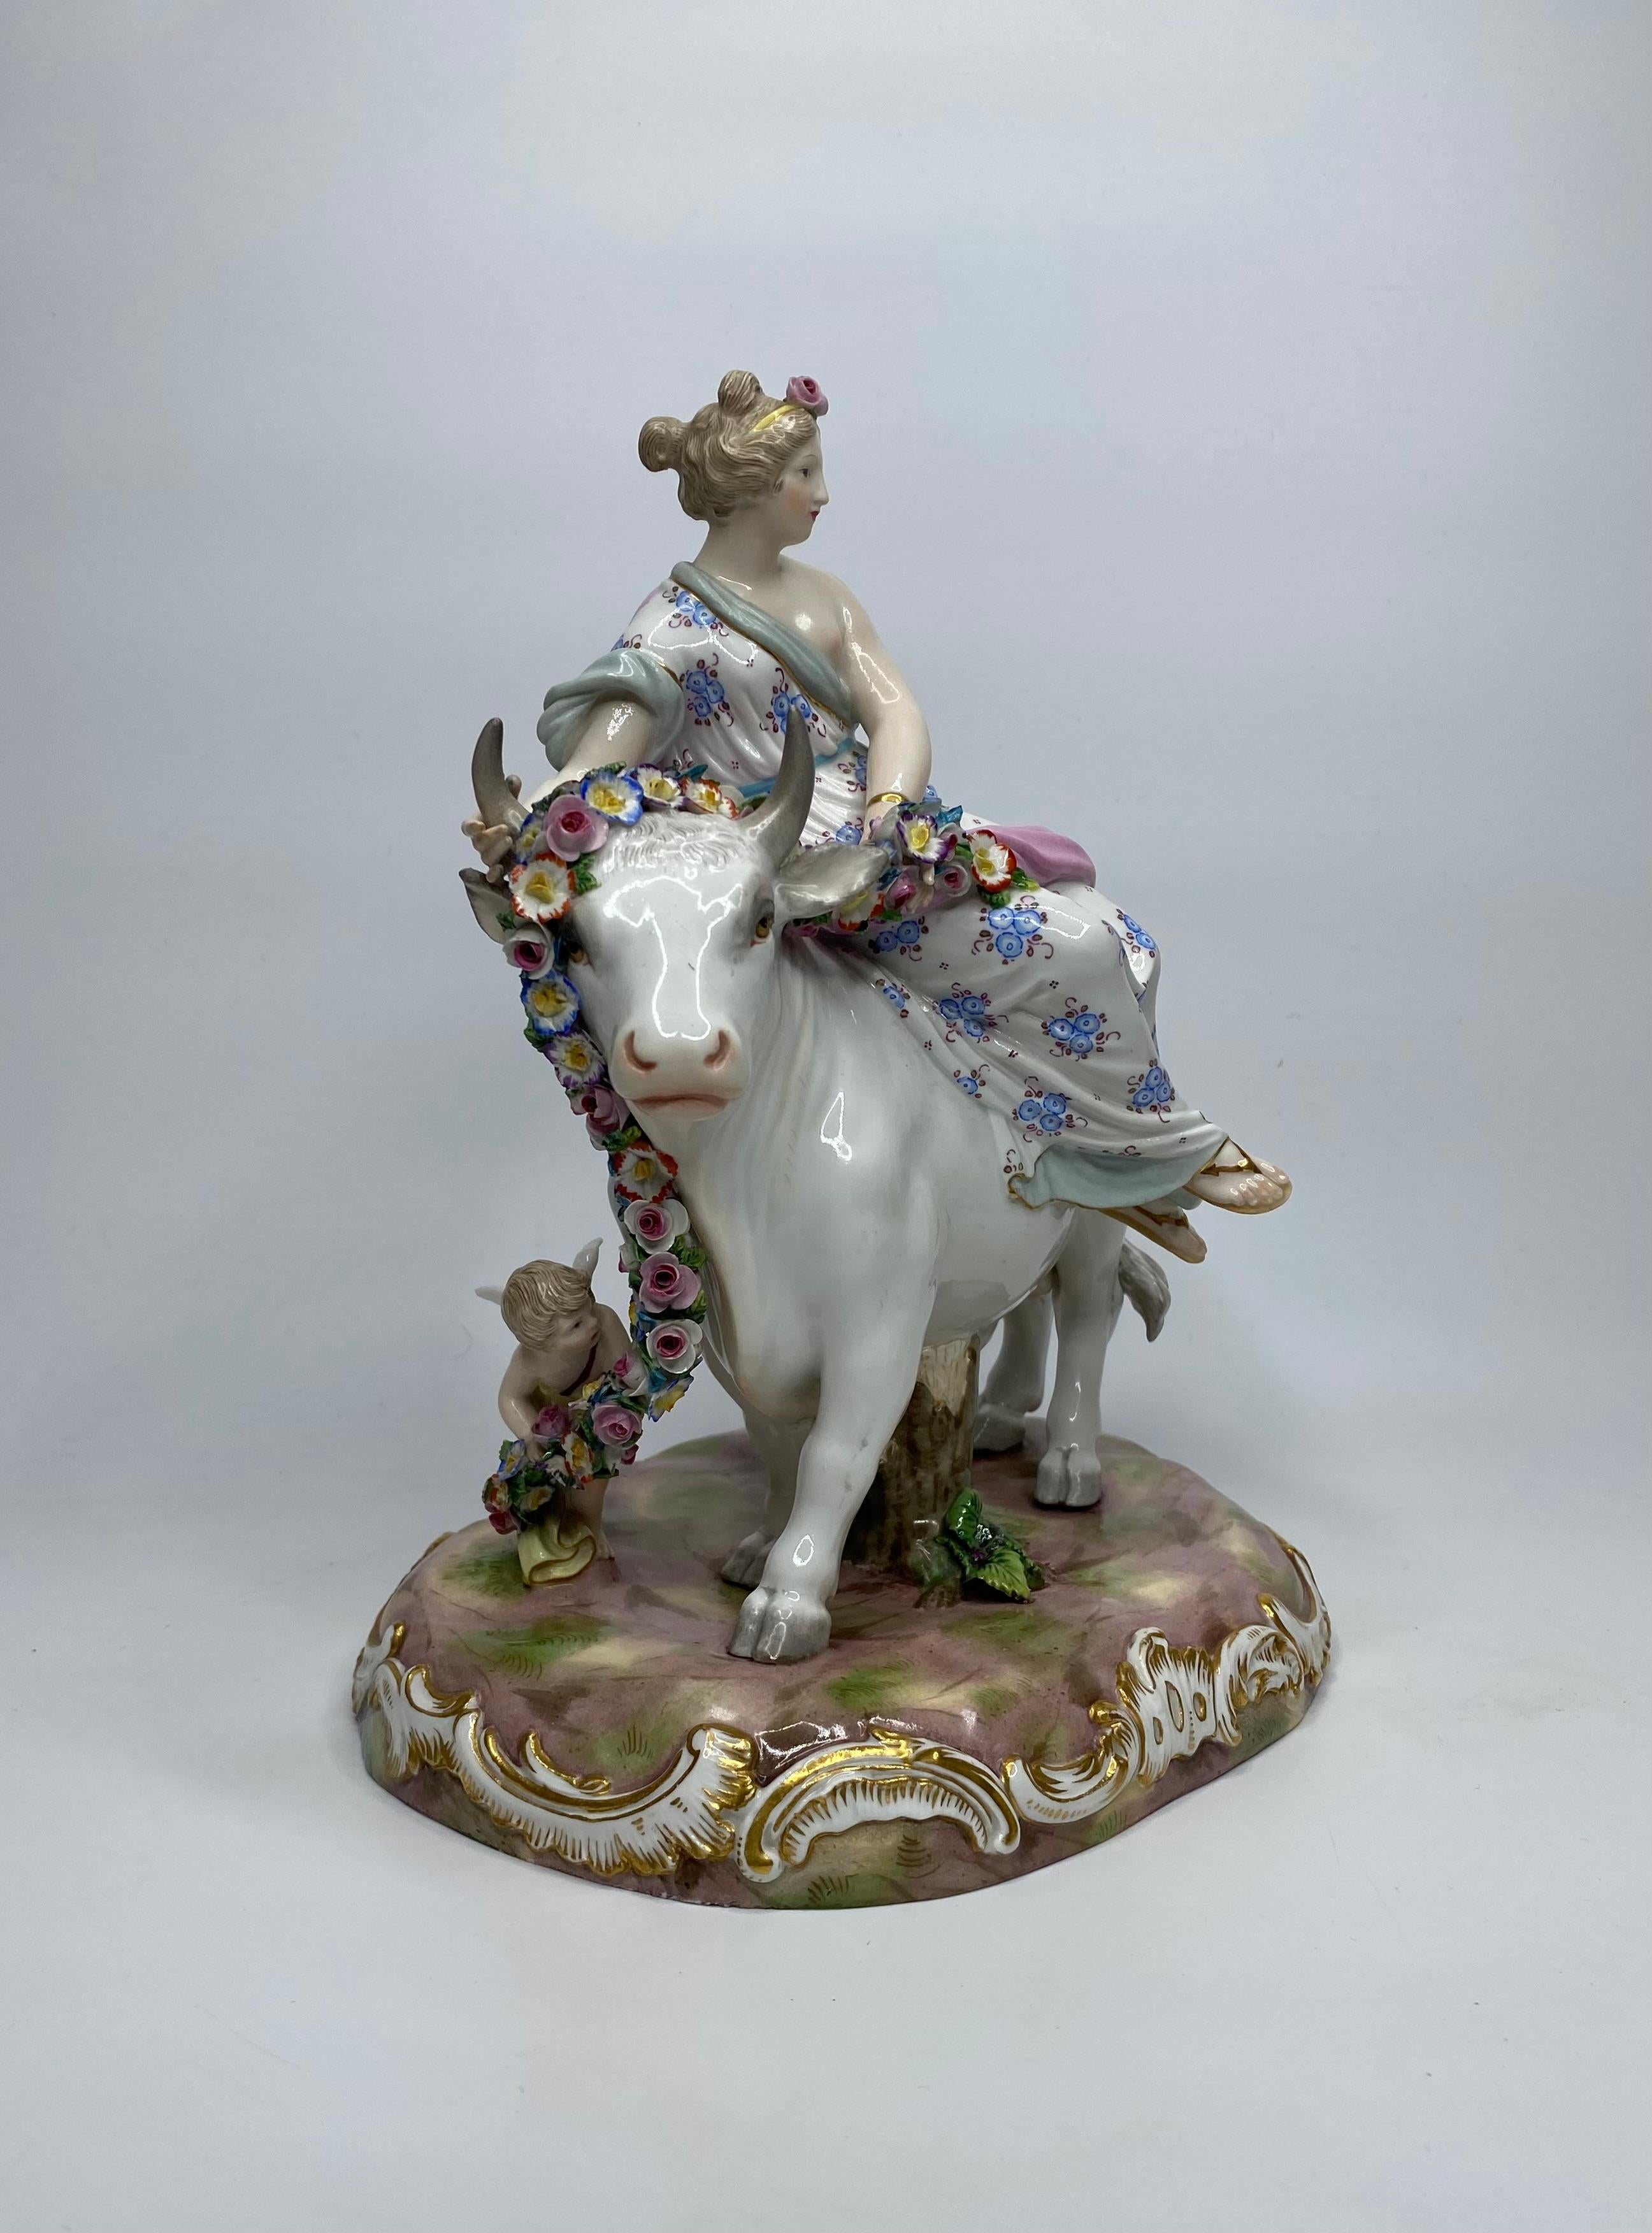 Meissen porcelain figure group, Europa and the Bull, c. 1870. Finely modelled with Europa wearing flowing robes, seated upon a large bull. She holds a garland of flowers, and is attended by a Cupid. Her dress painted with groups of flowers.
Set upon